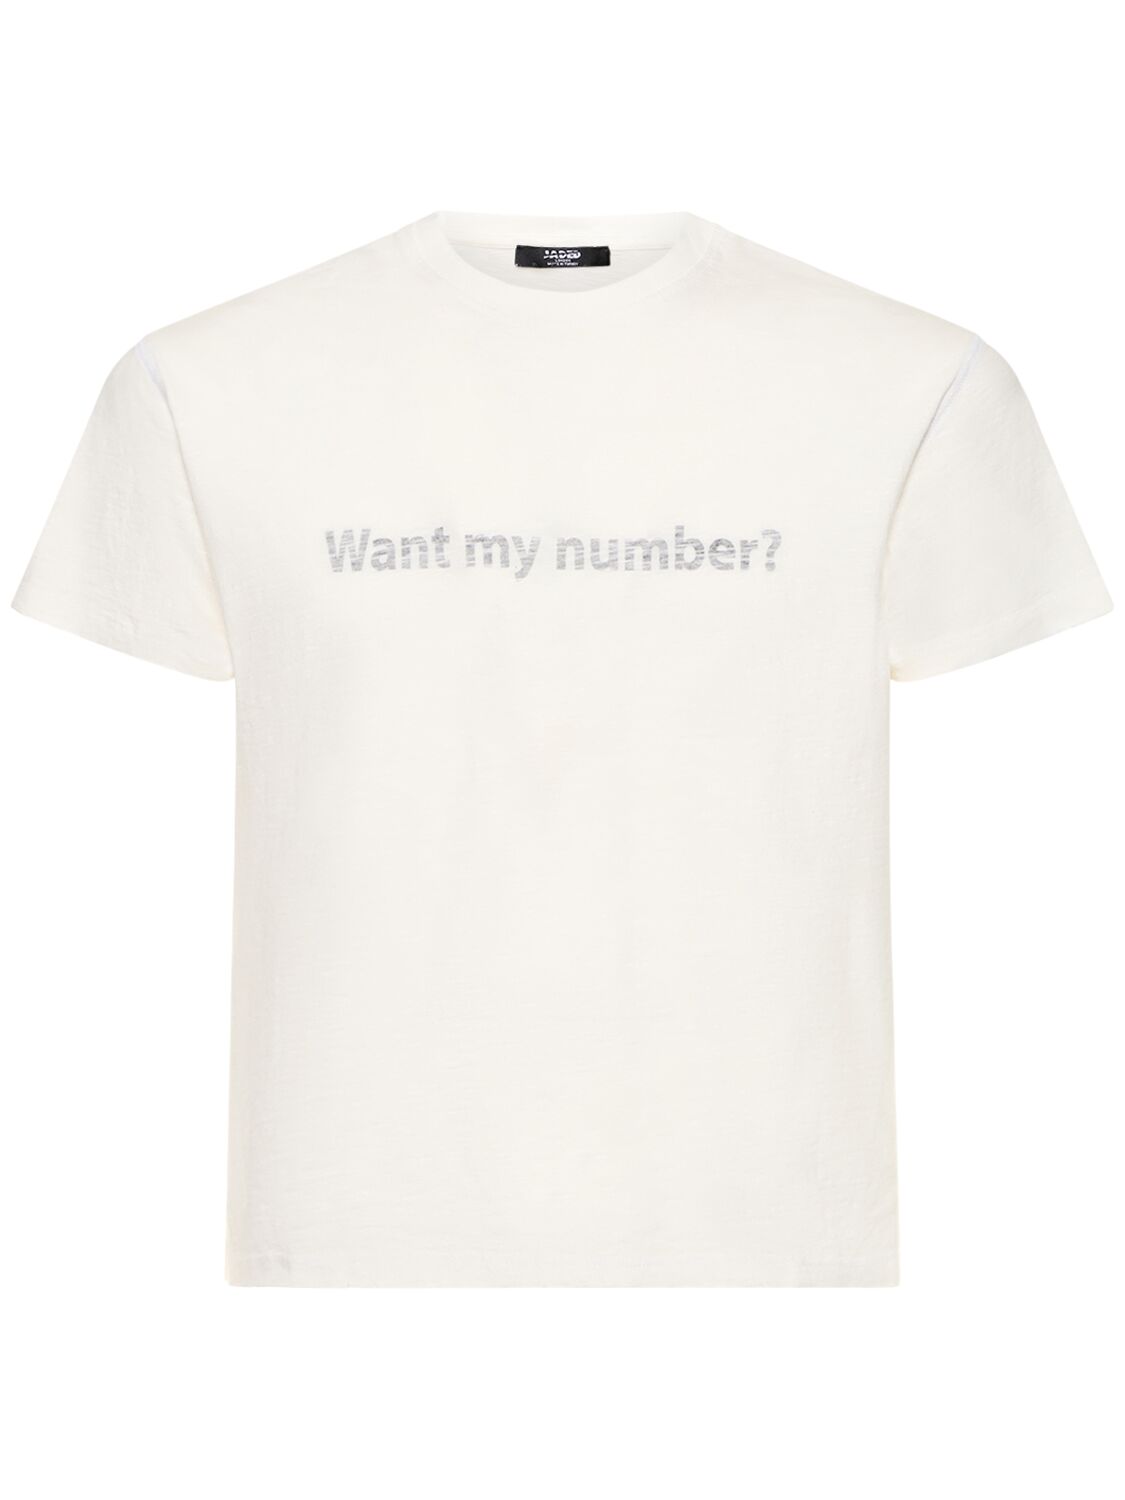 What's My Number? Printed Cotton T-shirt